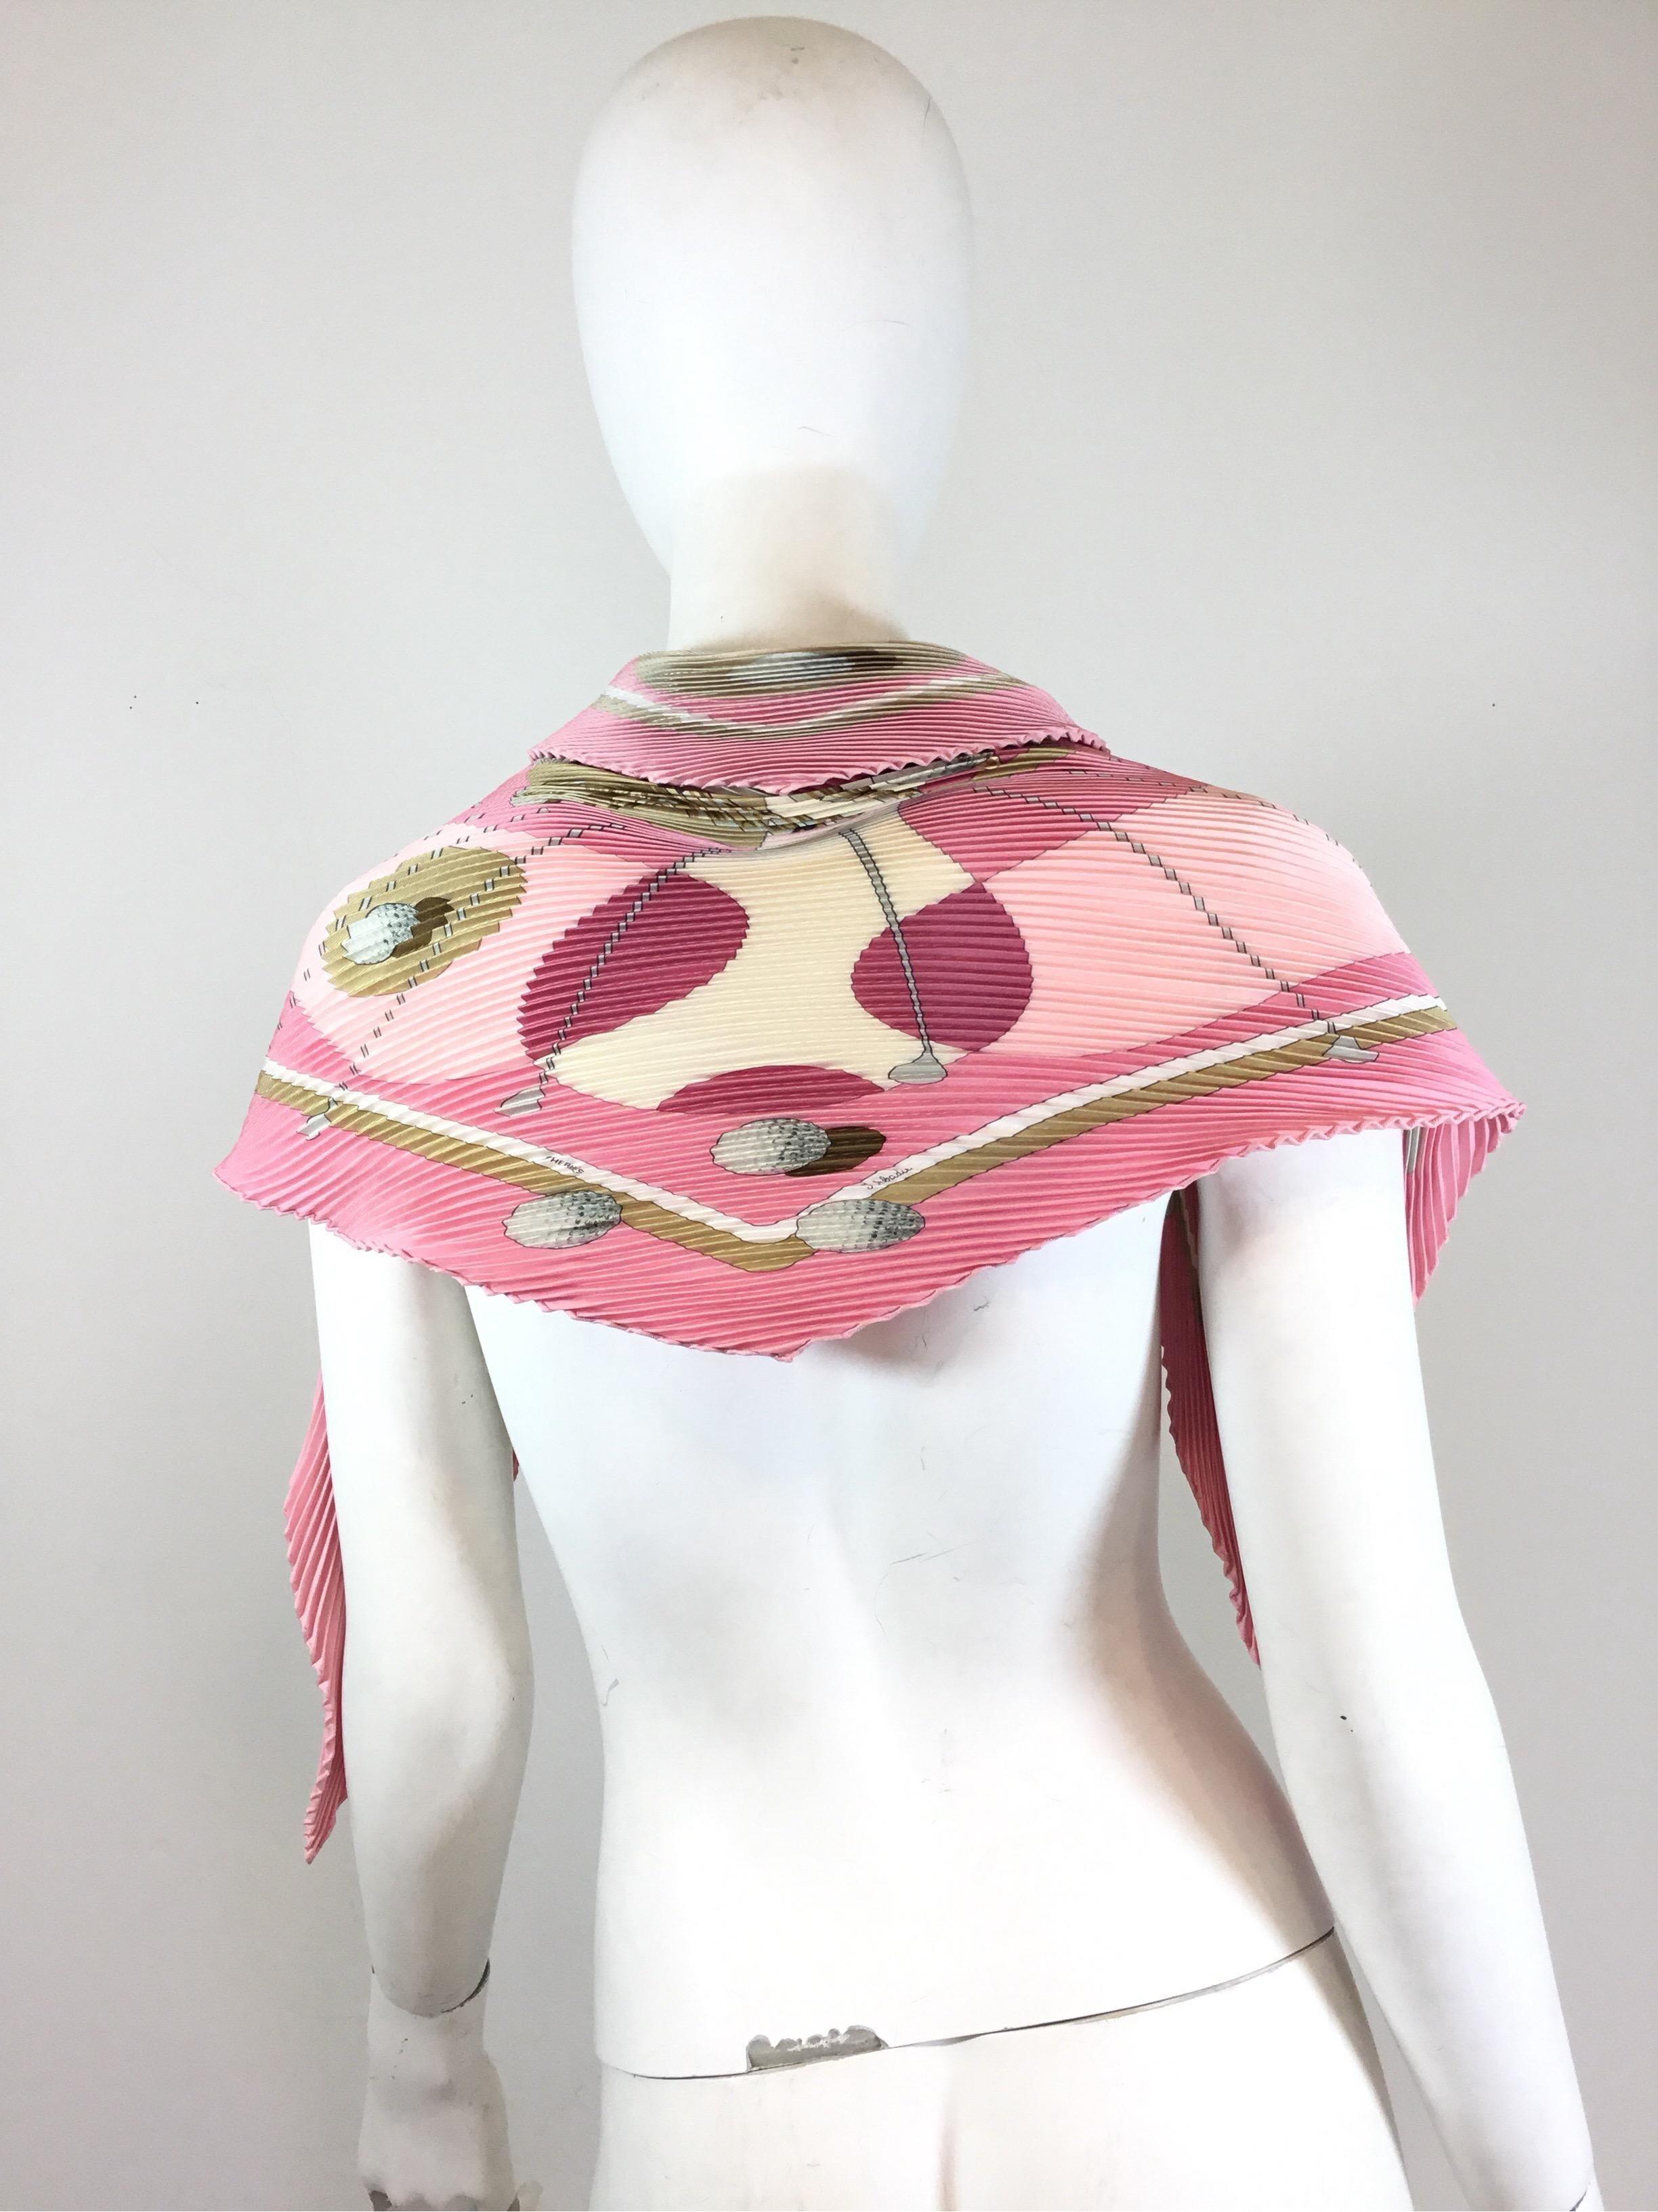 Hermes Silk plisse scarf featured in pink with gold motif. Made in France. In excellent condition, 90cm.